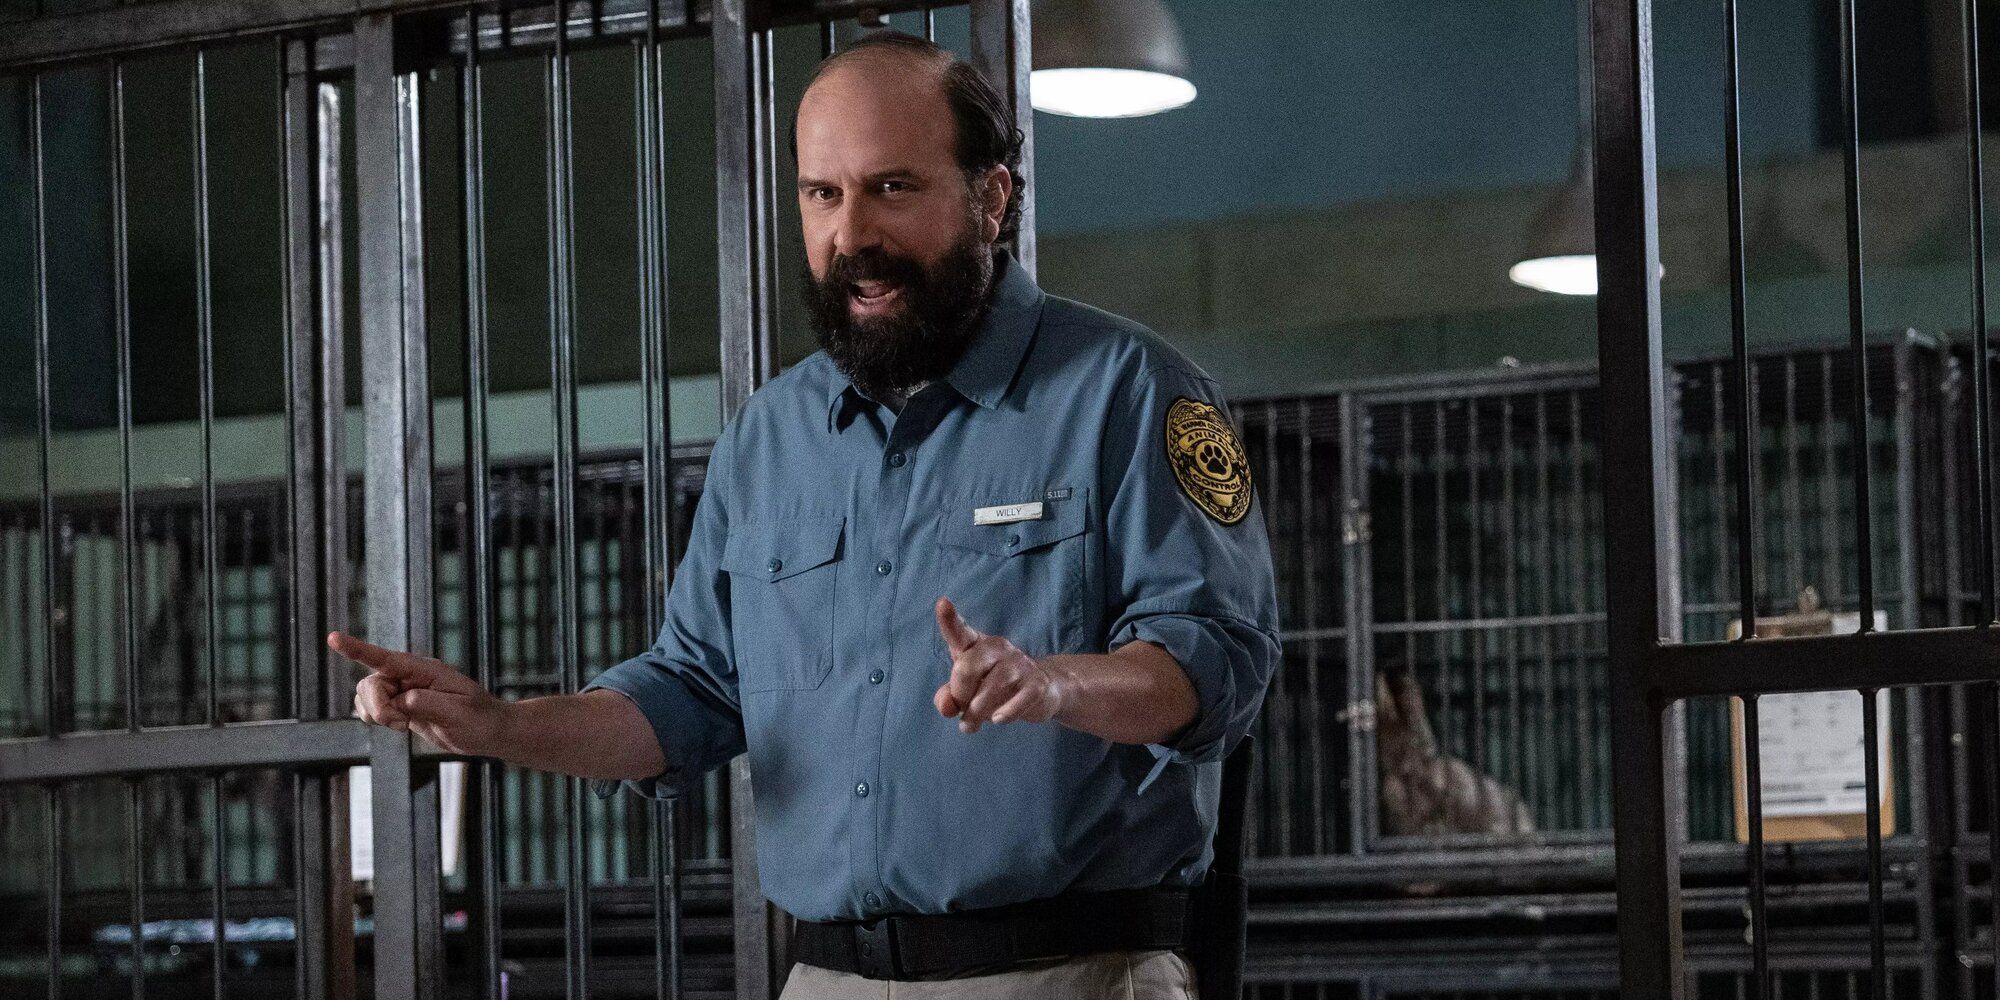 A still from the film Strays featuring the character Willy, played by Brett Gelman